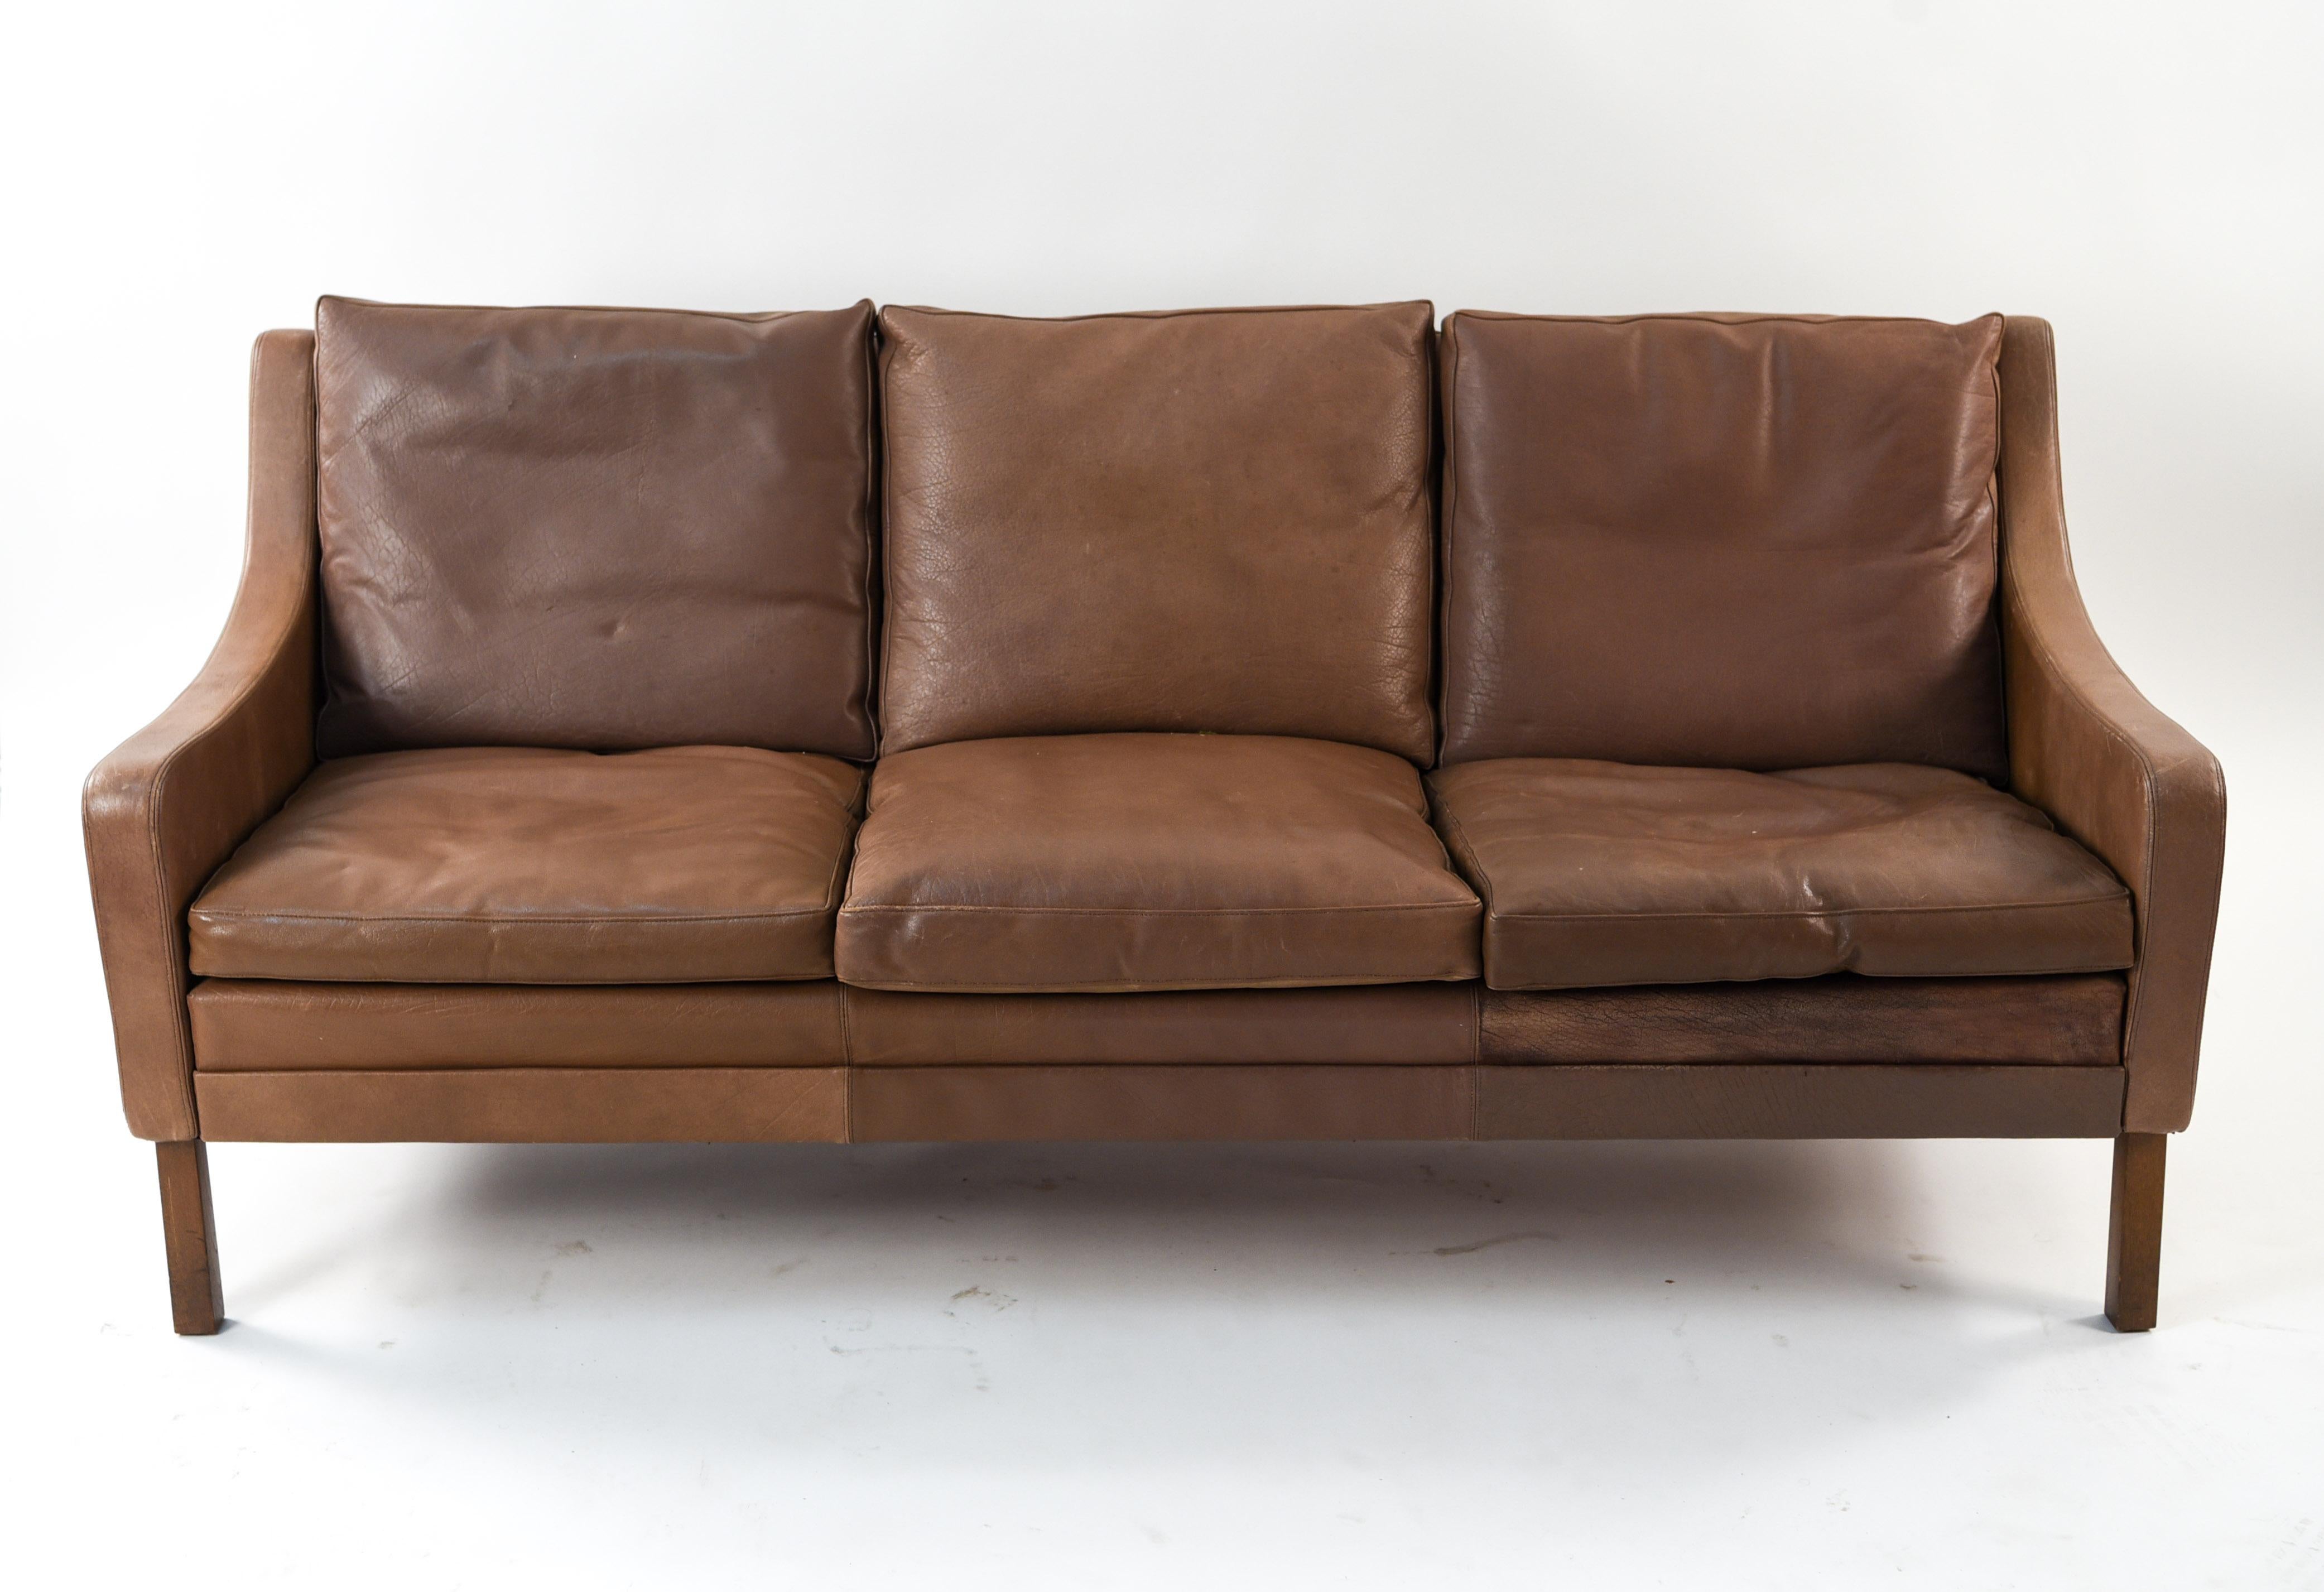 This Danish midcentury leather sofa is in the manner of designer Børge Mogensen. It seats three comfortably and is upholstered in vintage brown leather that has acquired a lovely patina from age and use.